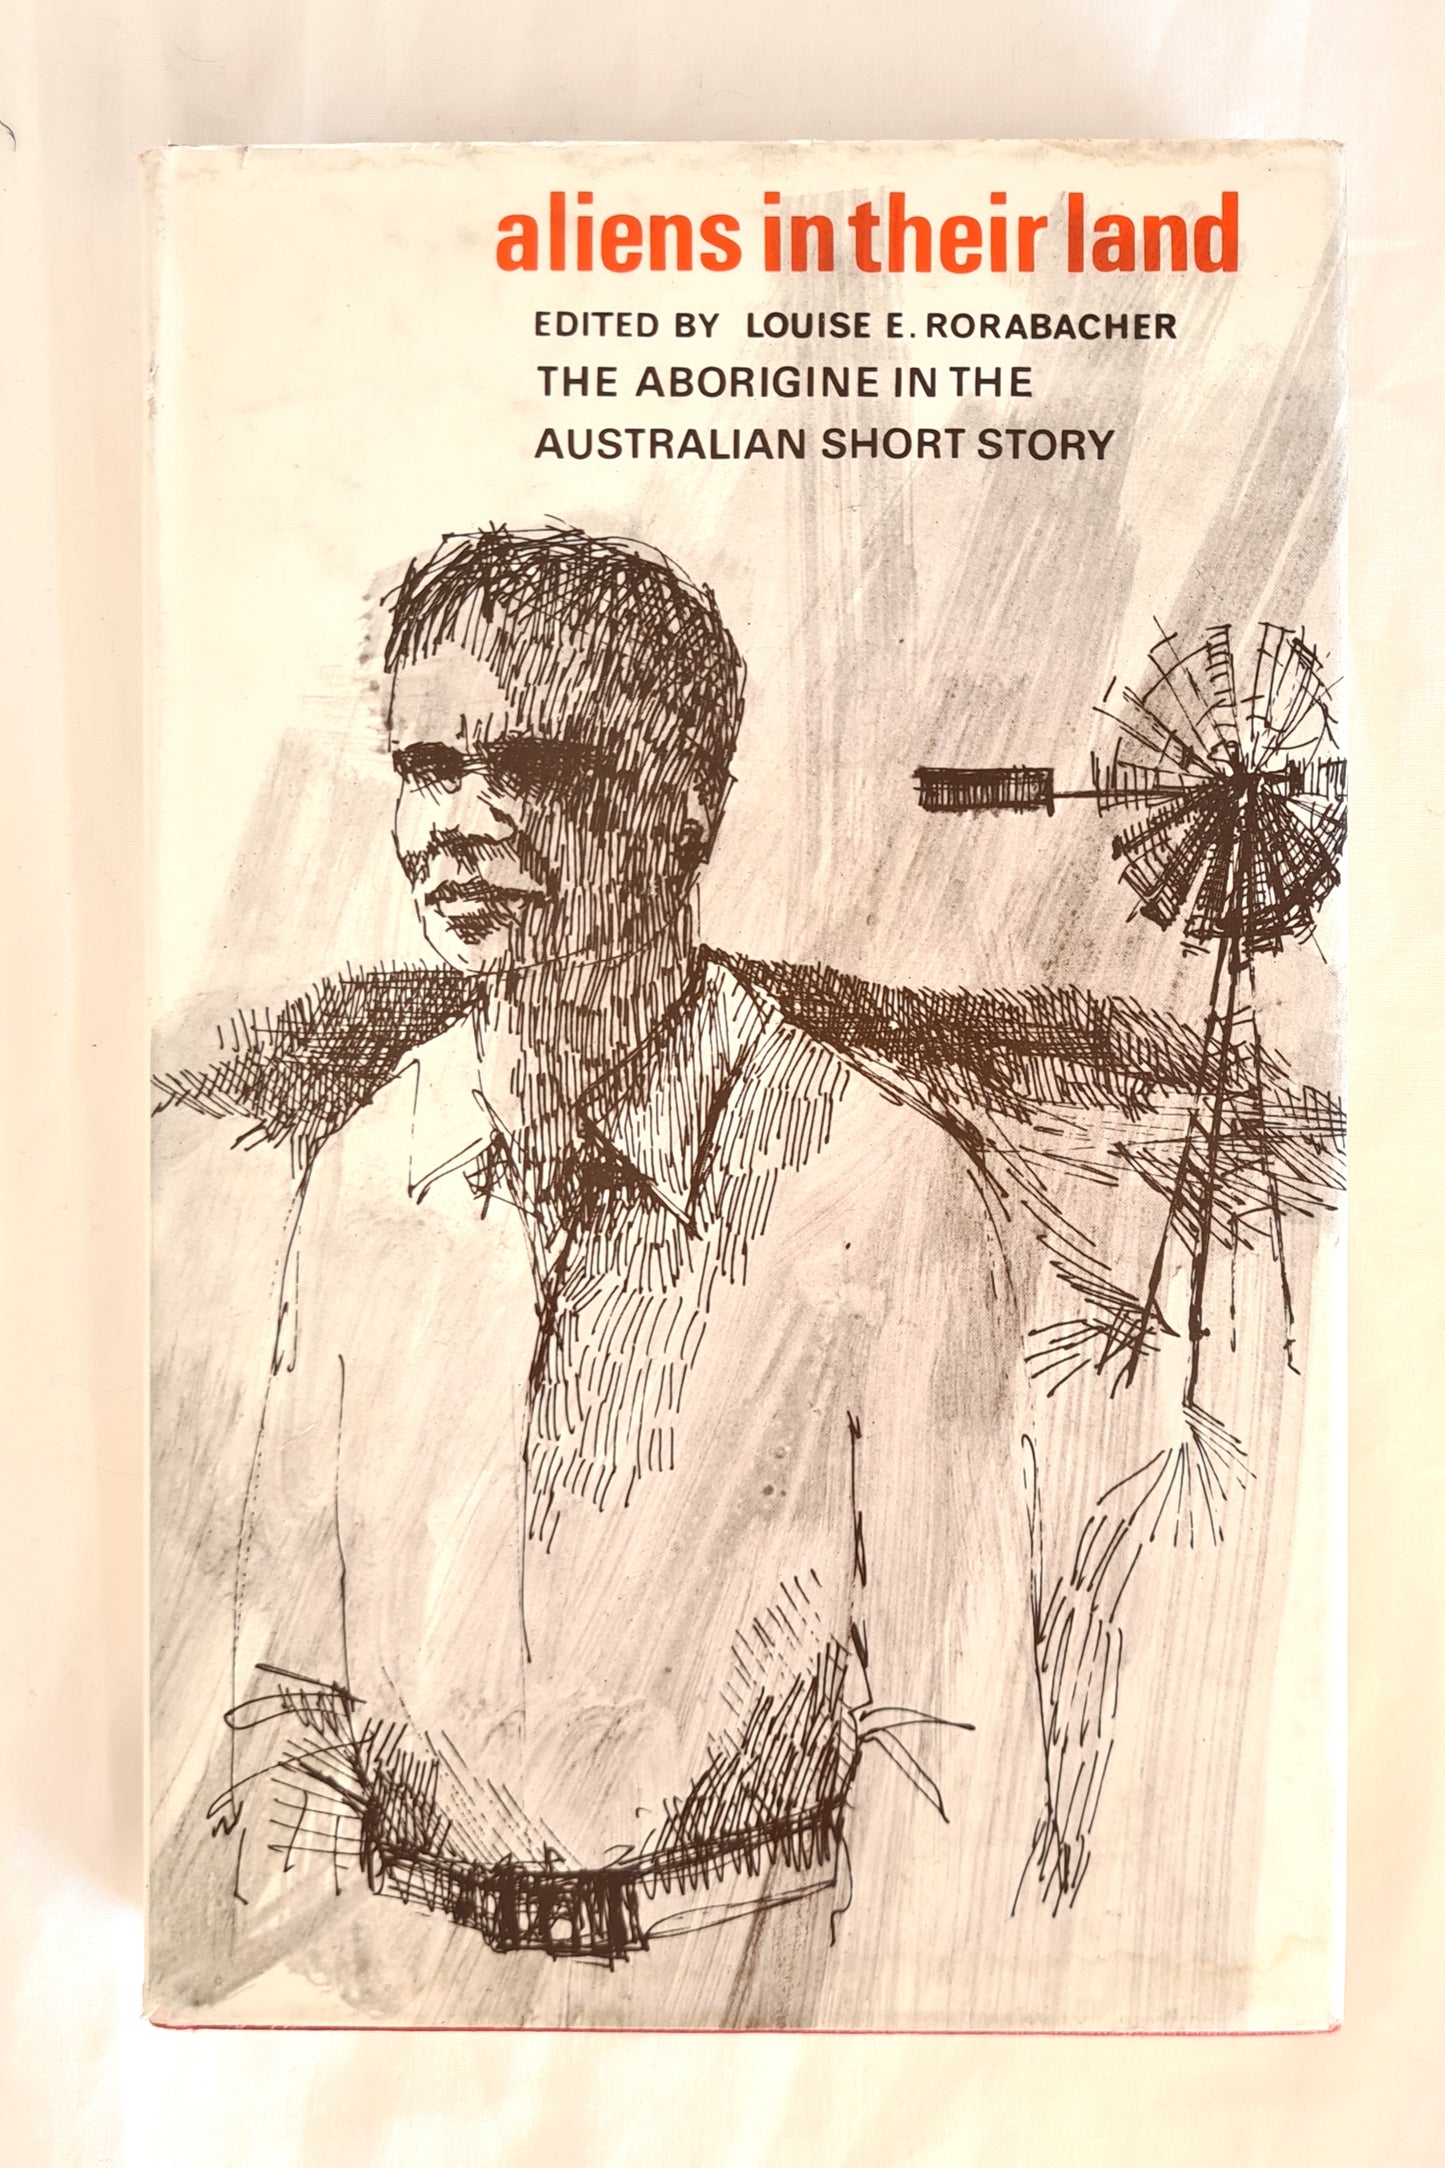 Aliens in Their Land  The Aborigine in the Australian Short Story  Edited by Louise E. Rorabacher